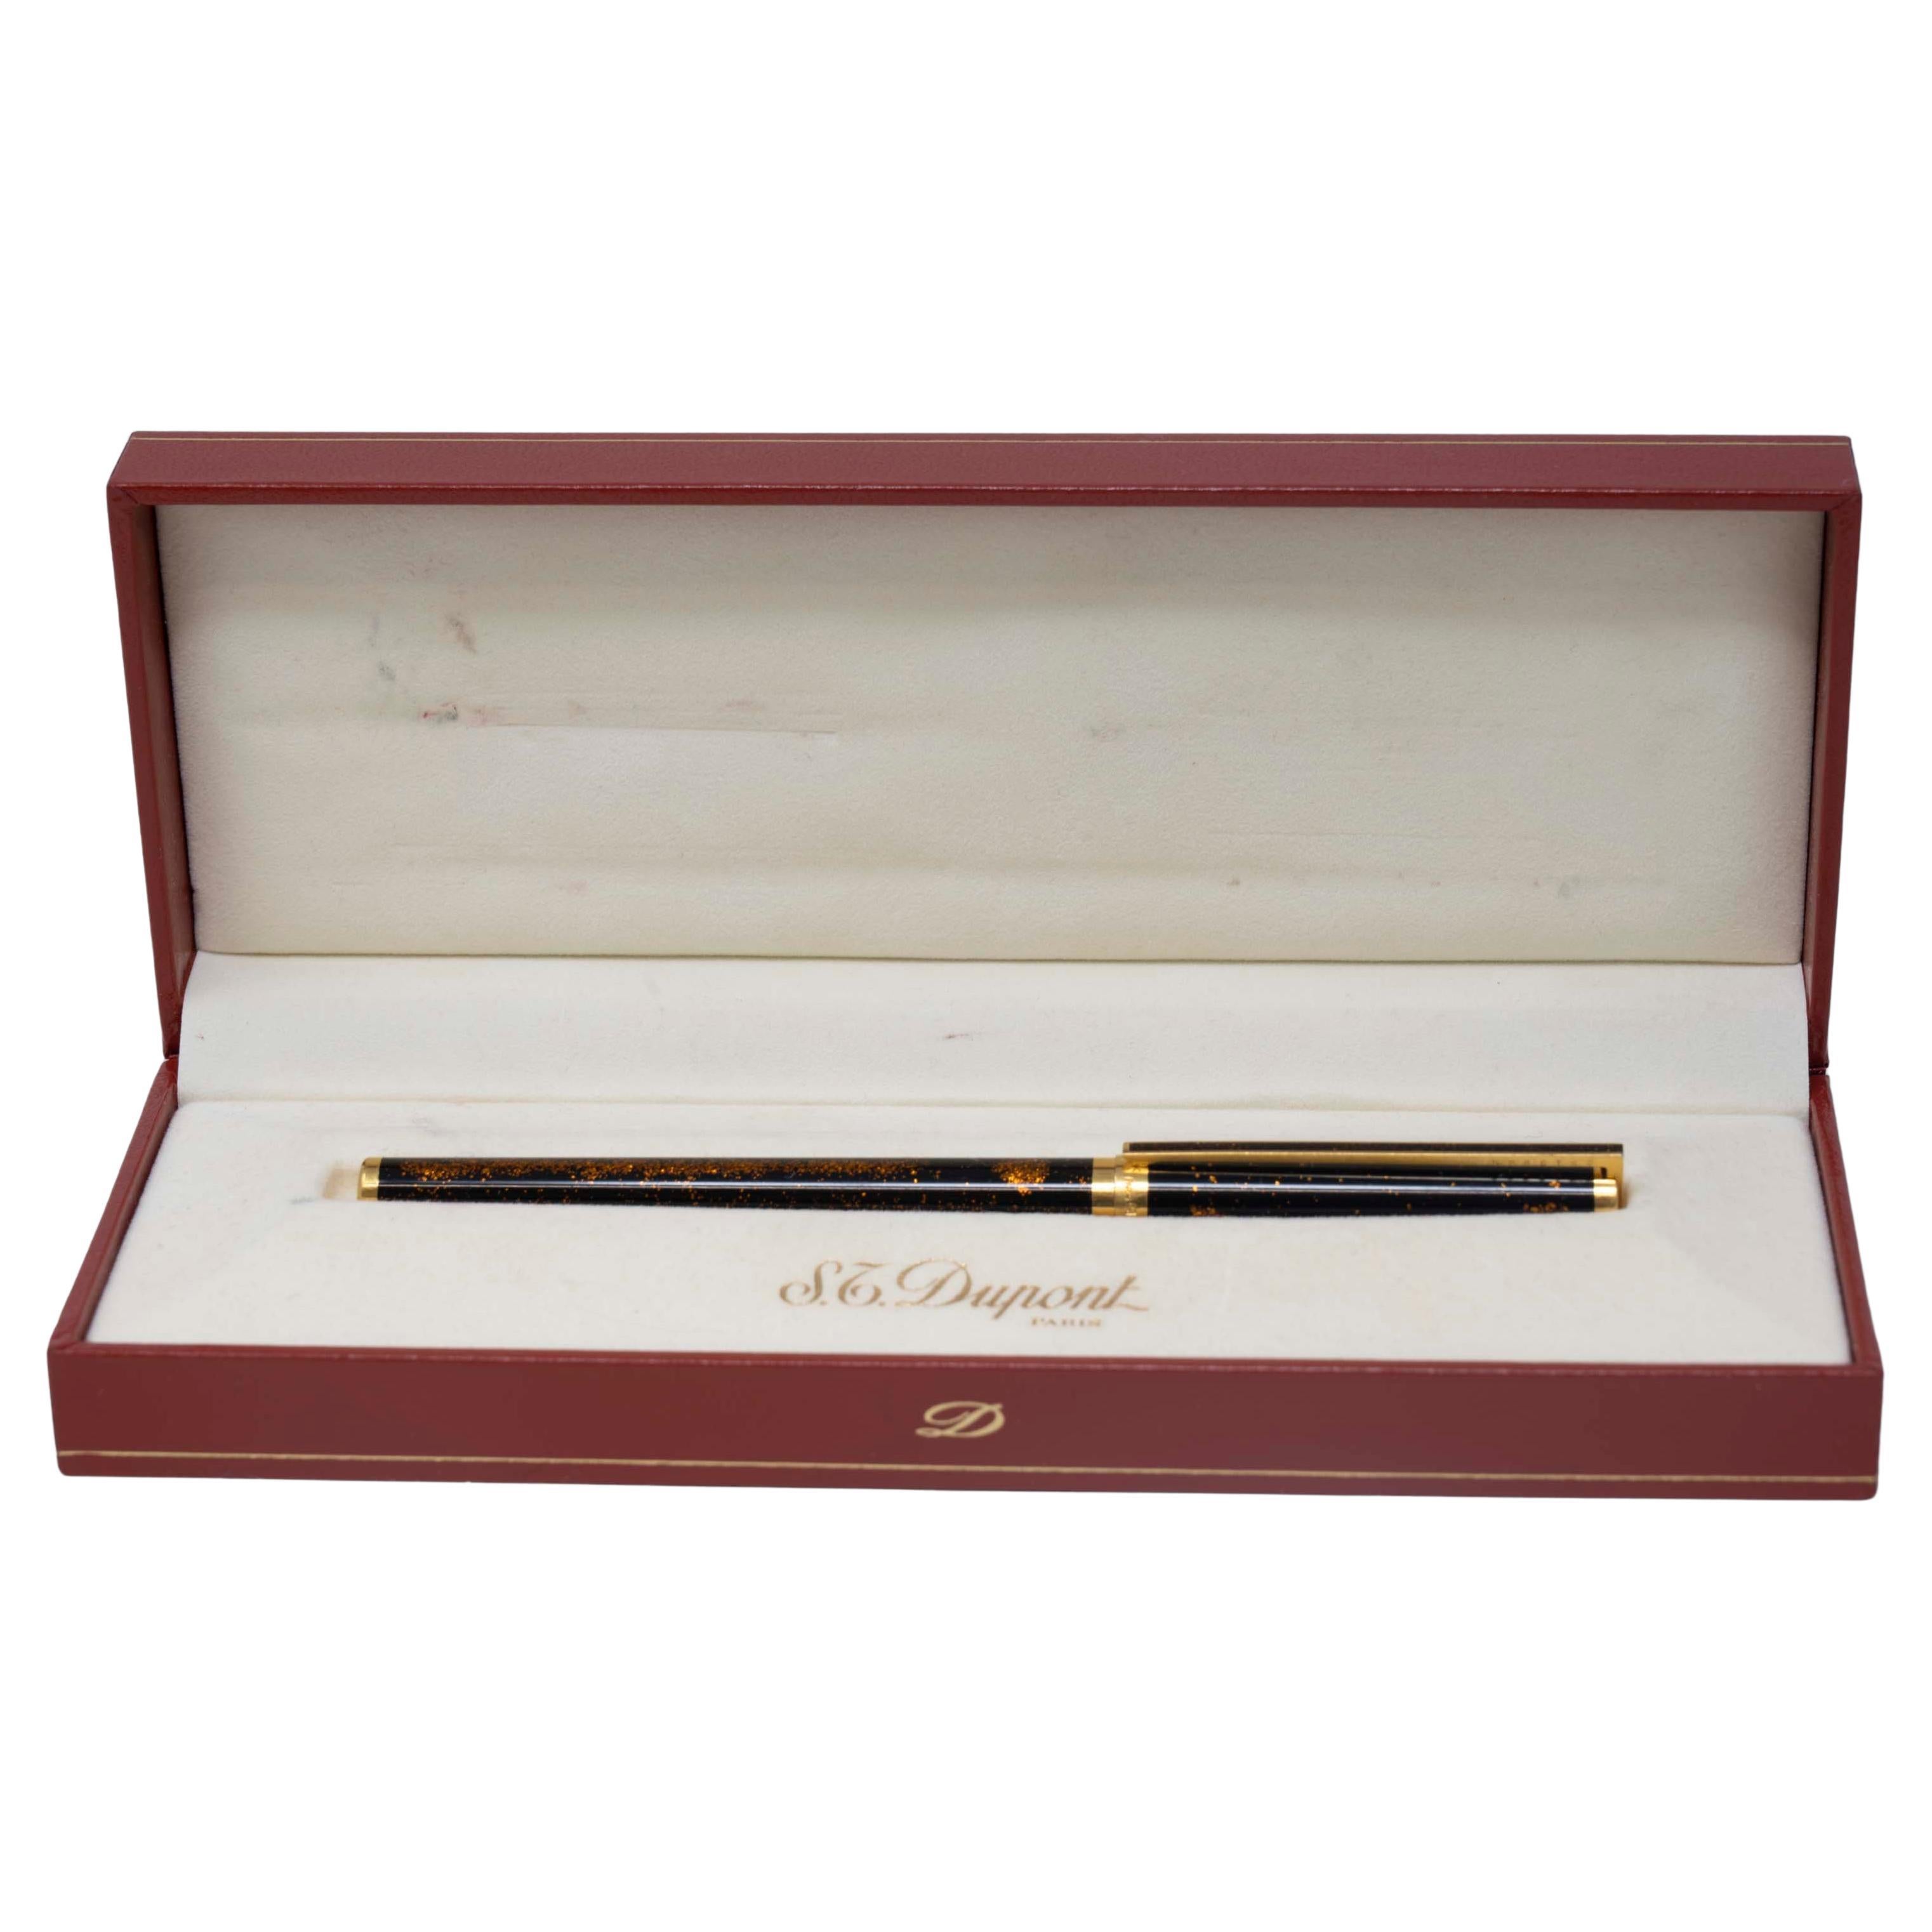 S.T. Dupont Fountain Pen 52BGT80 Laque de Chine at 1stDibs